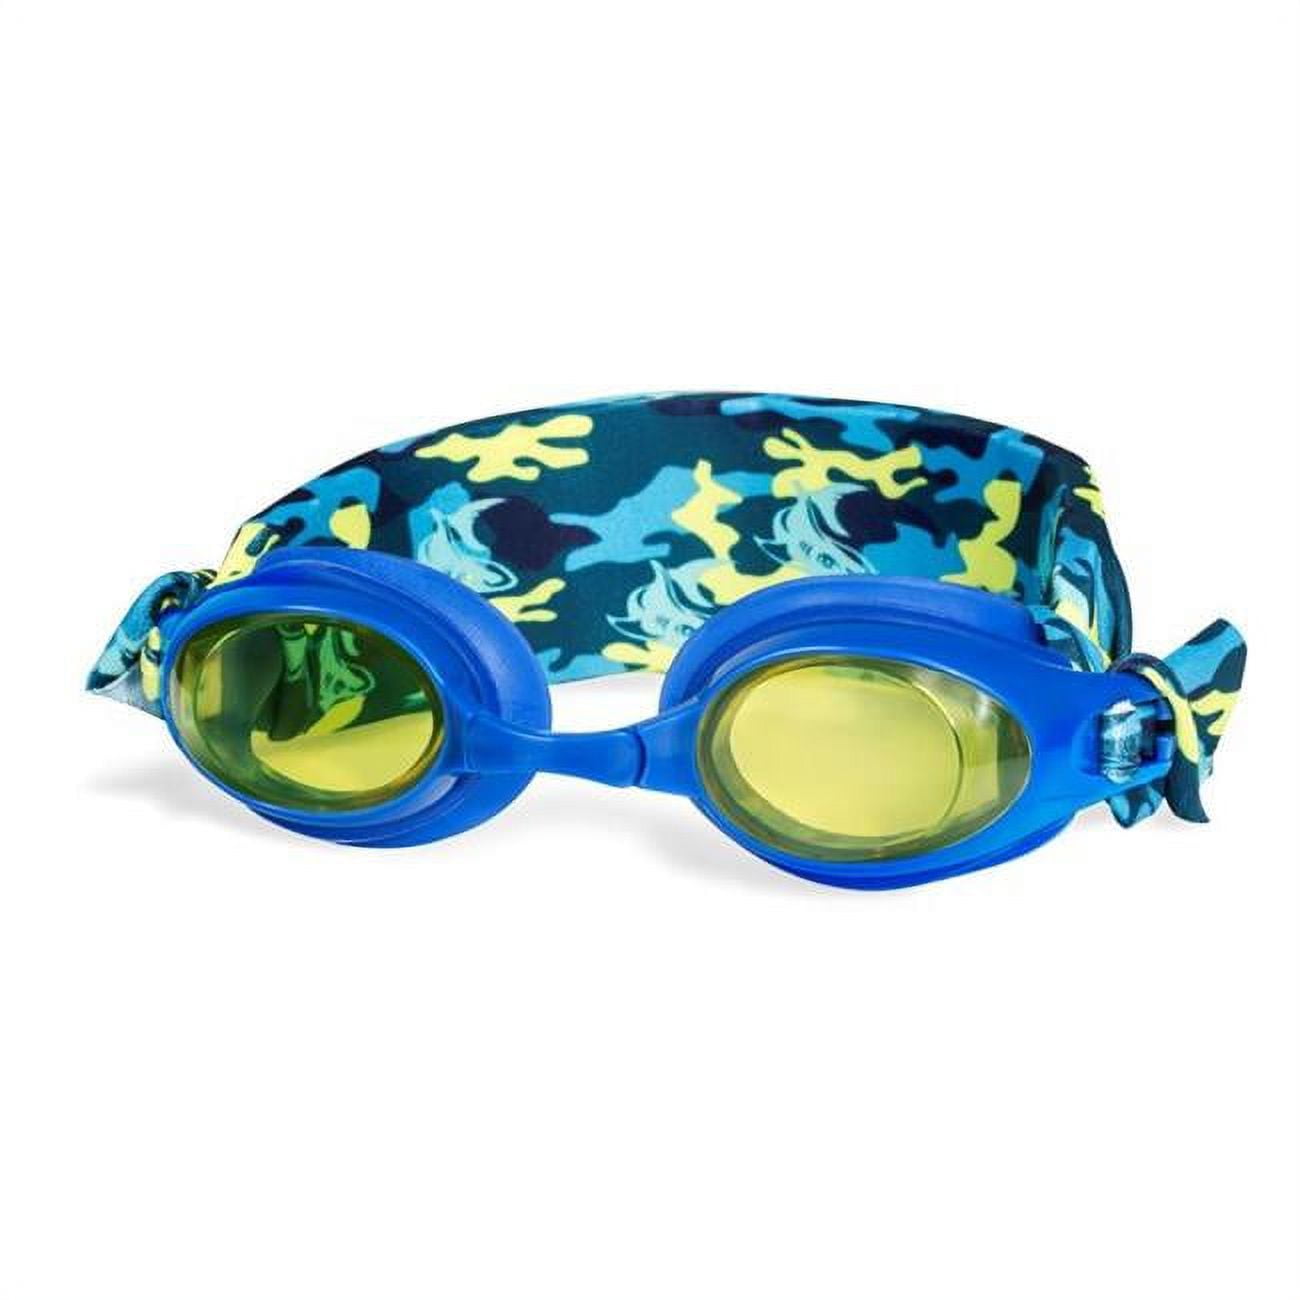 Picture of Aqua Leisure 8084922 Fabric & Mesh Goggles - assorted colors